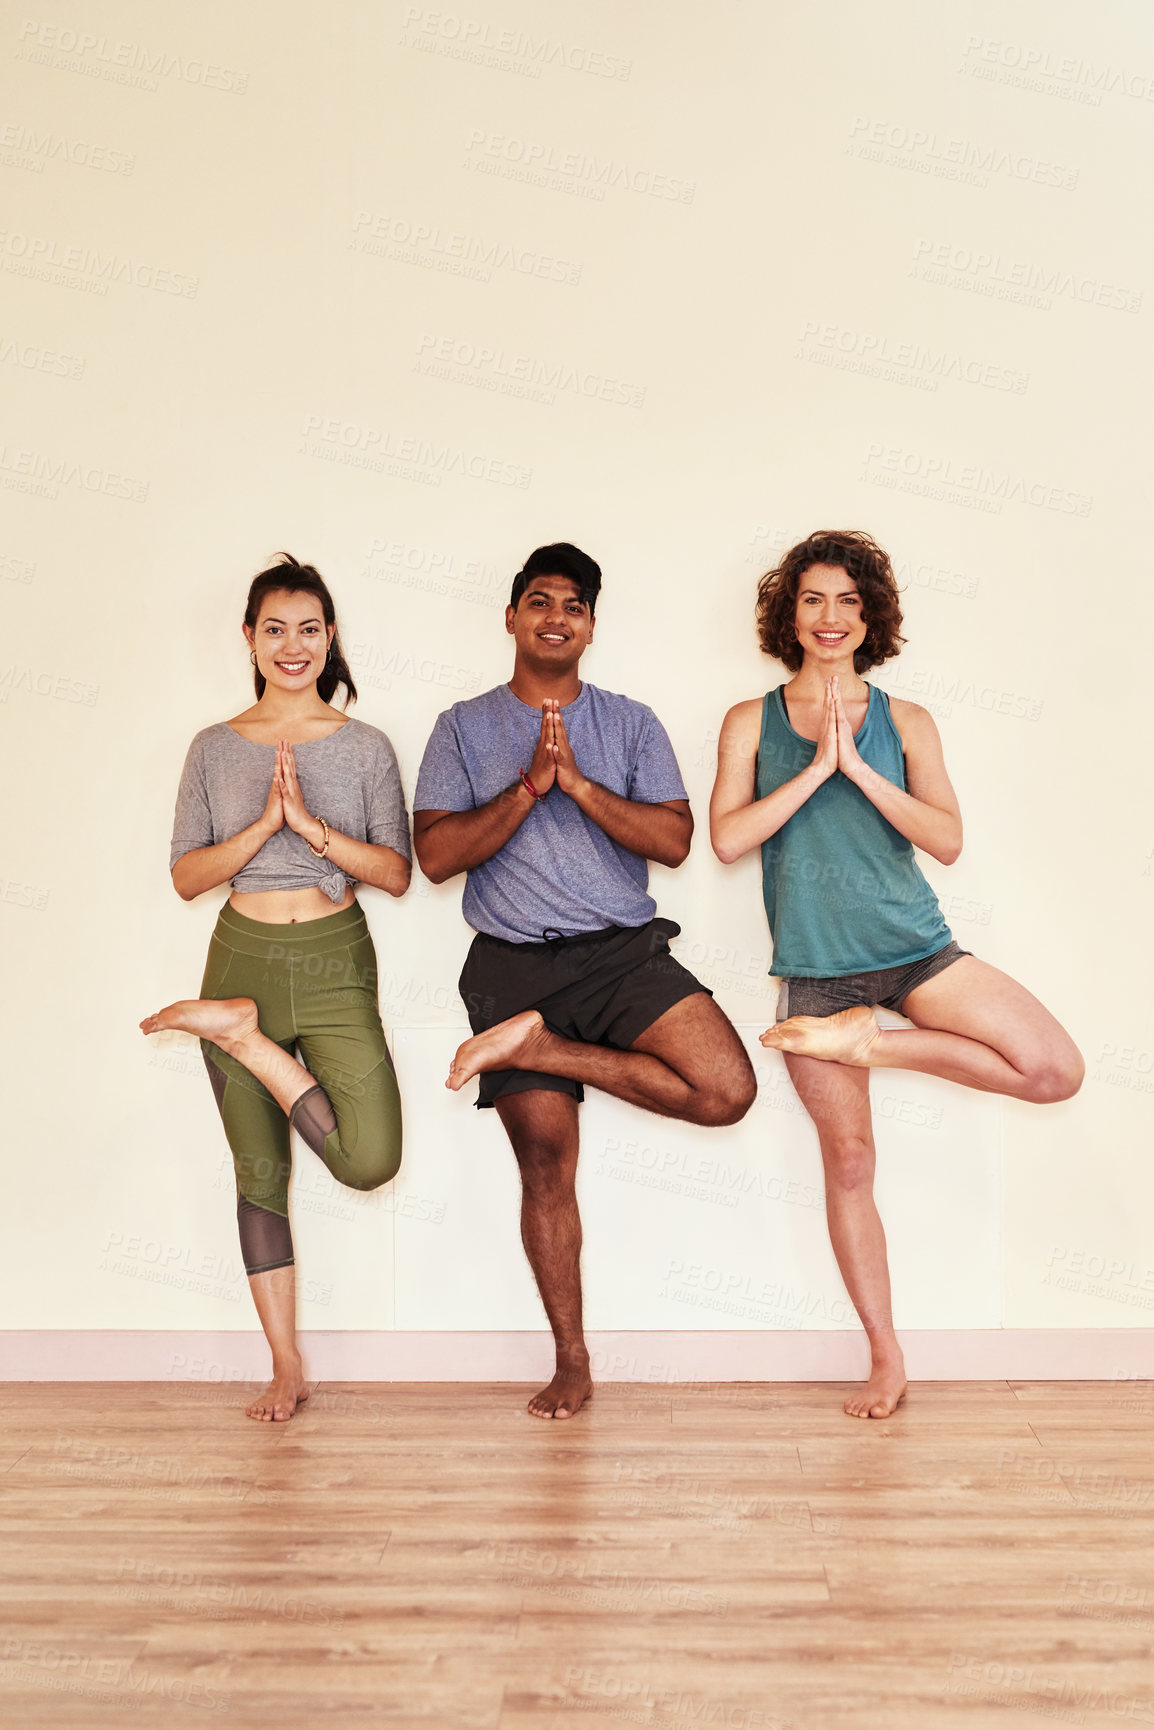 Buy stock photo Shot of a group of young men and women practicing the tree pose during a yoga session